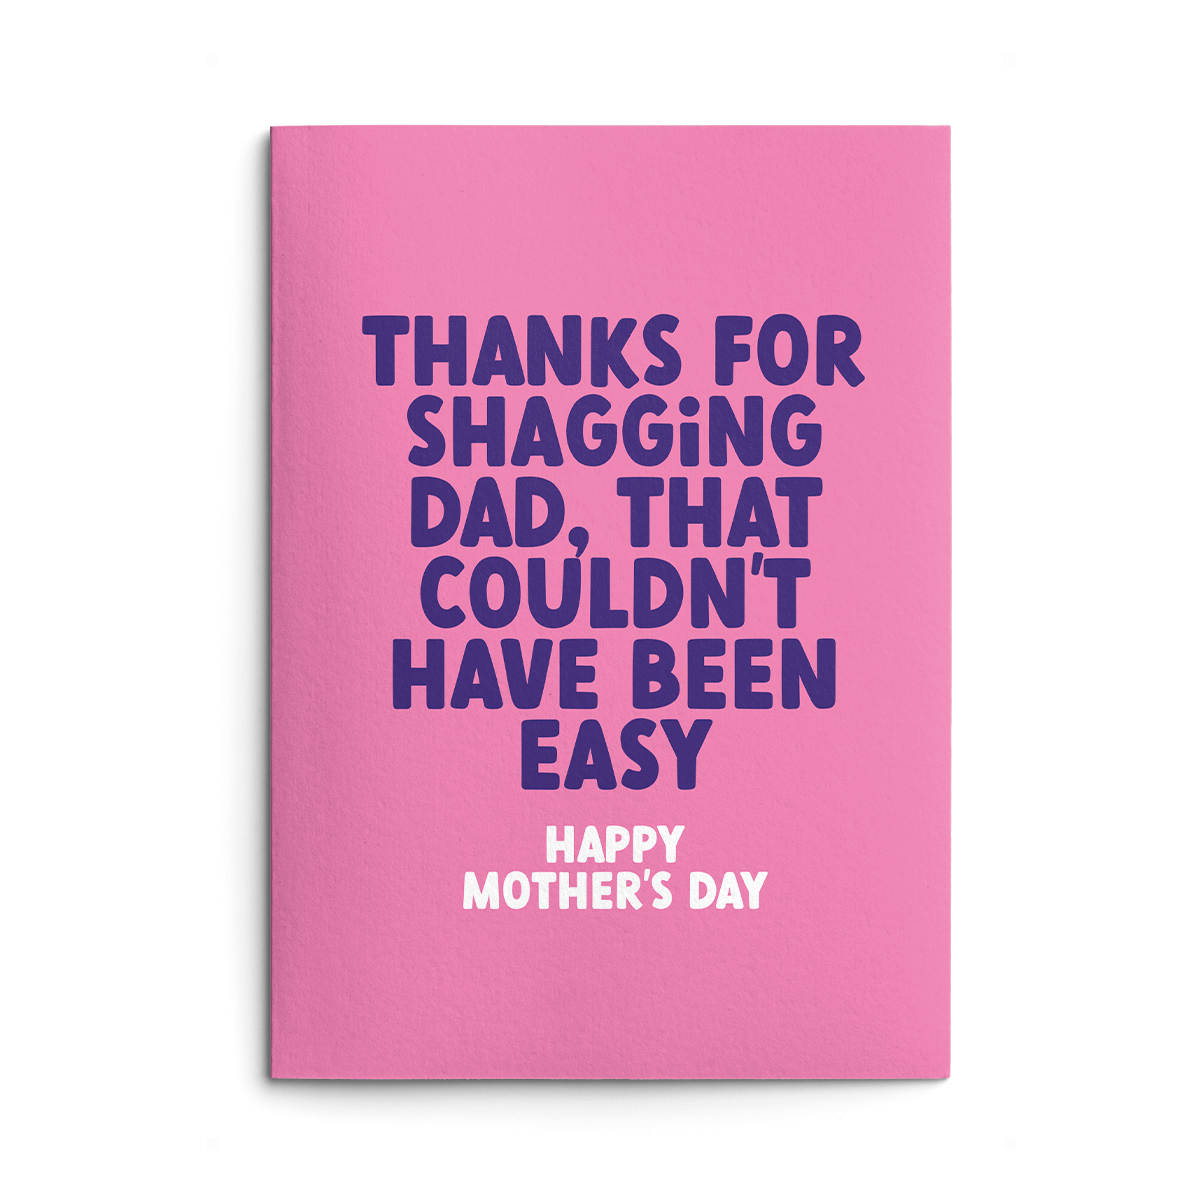 Mam Mother's Day Card text reads "Thanks for shagging Dad, that couldn't have been easy Happy Mother's Day"